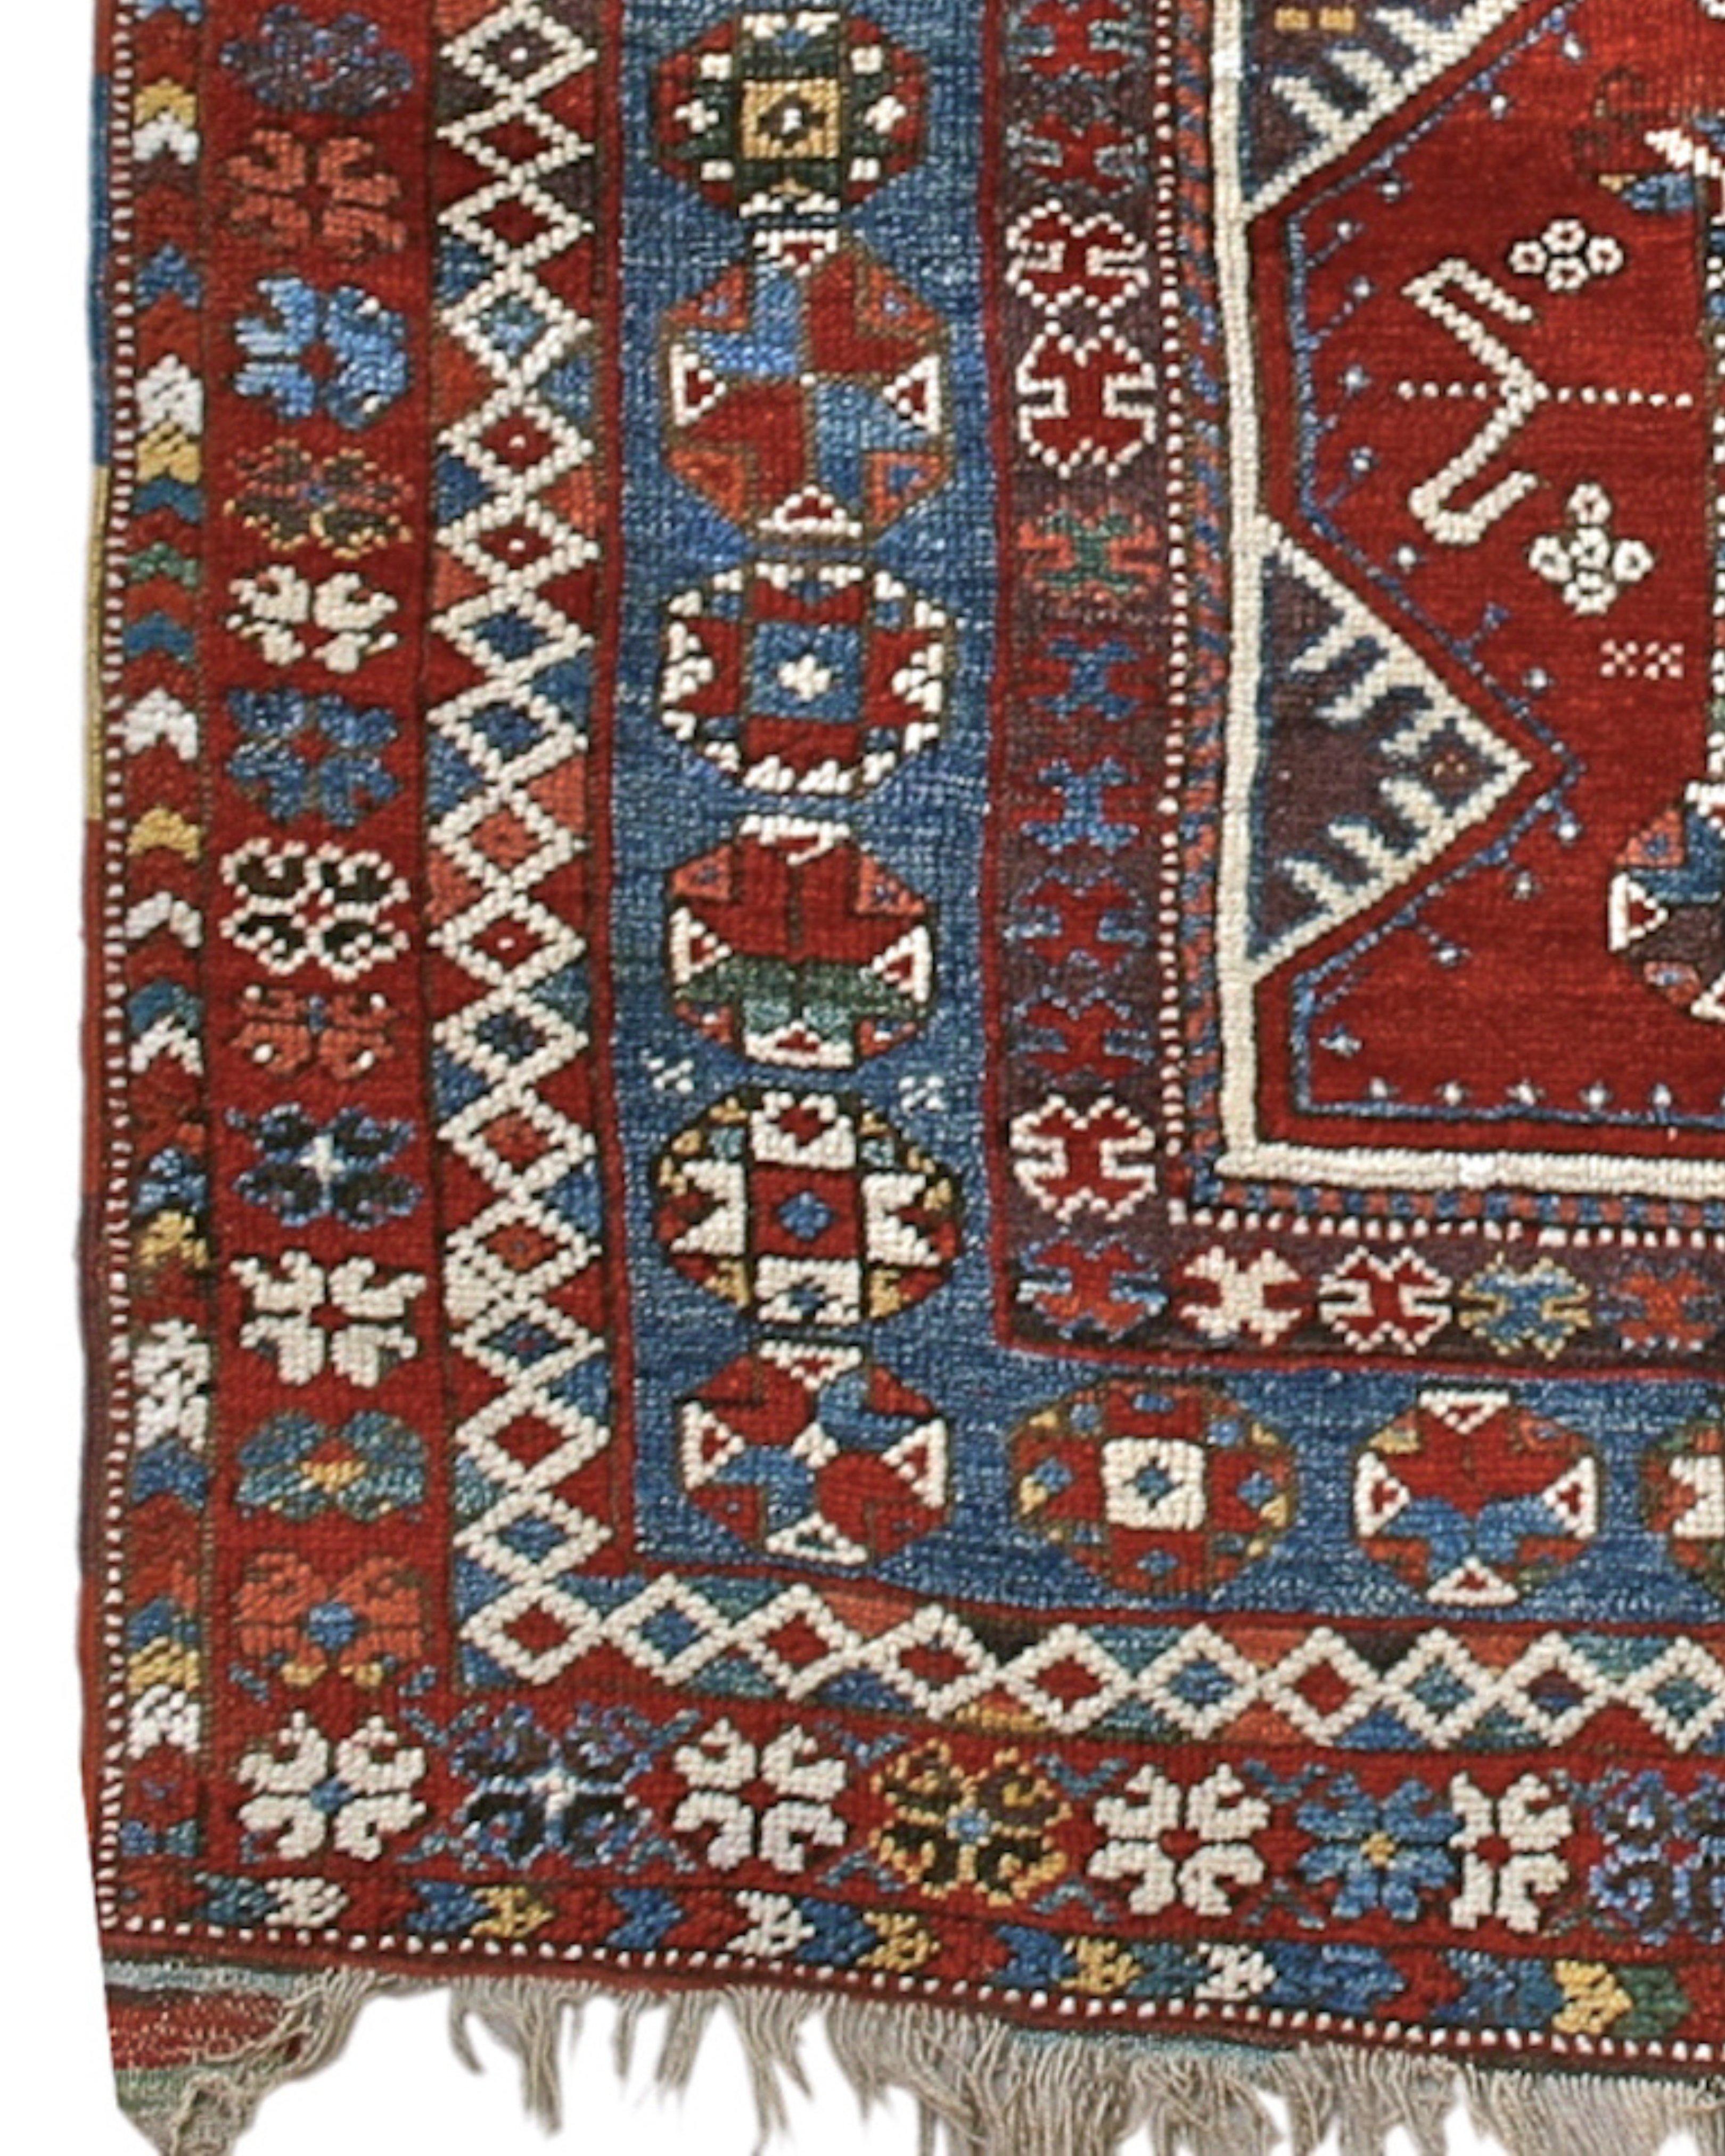 Hand-Knotted Antique Balikesir Prayer Rug, Mid-19th Century For Sale